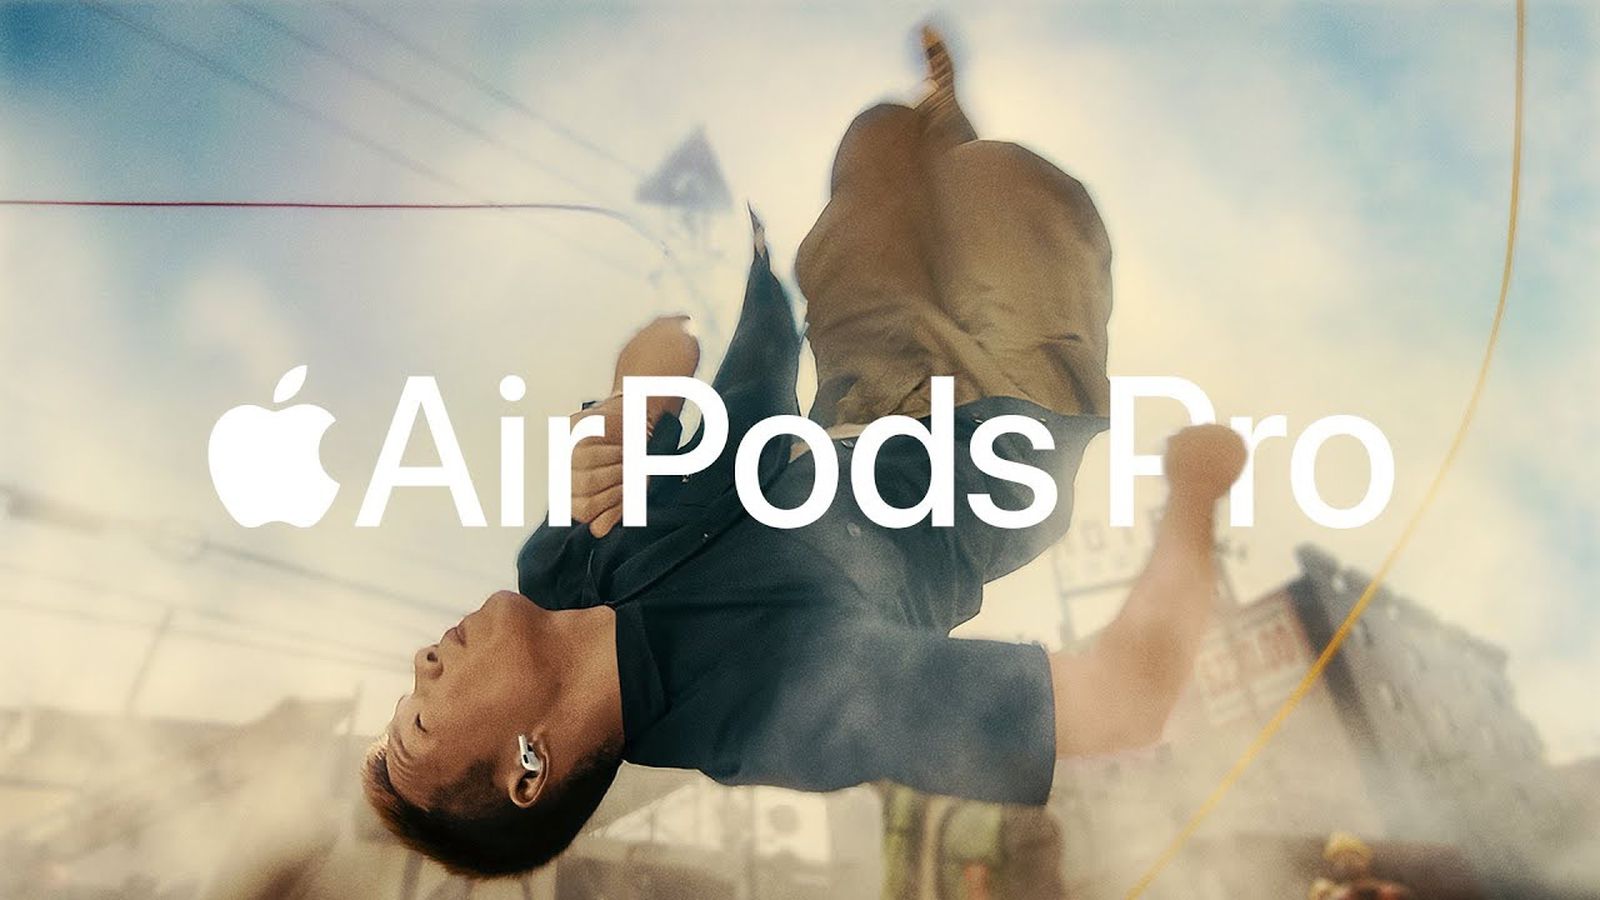 Apple shares ‘Jump’ AirPods Pro ad